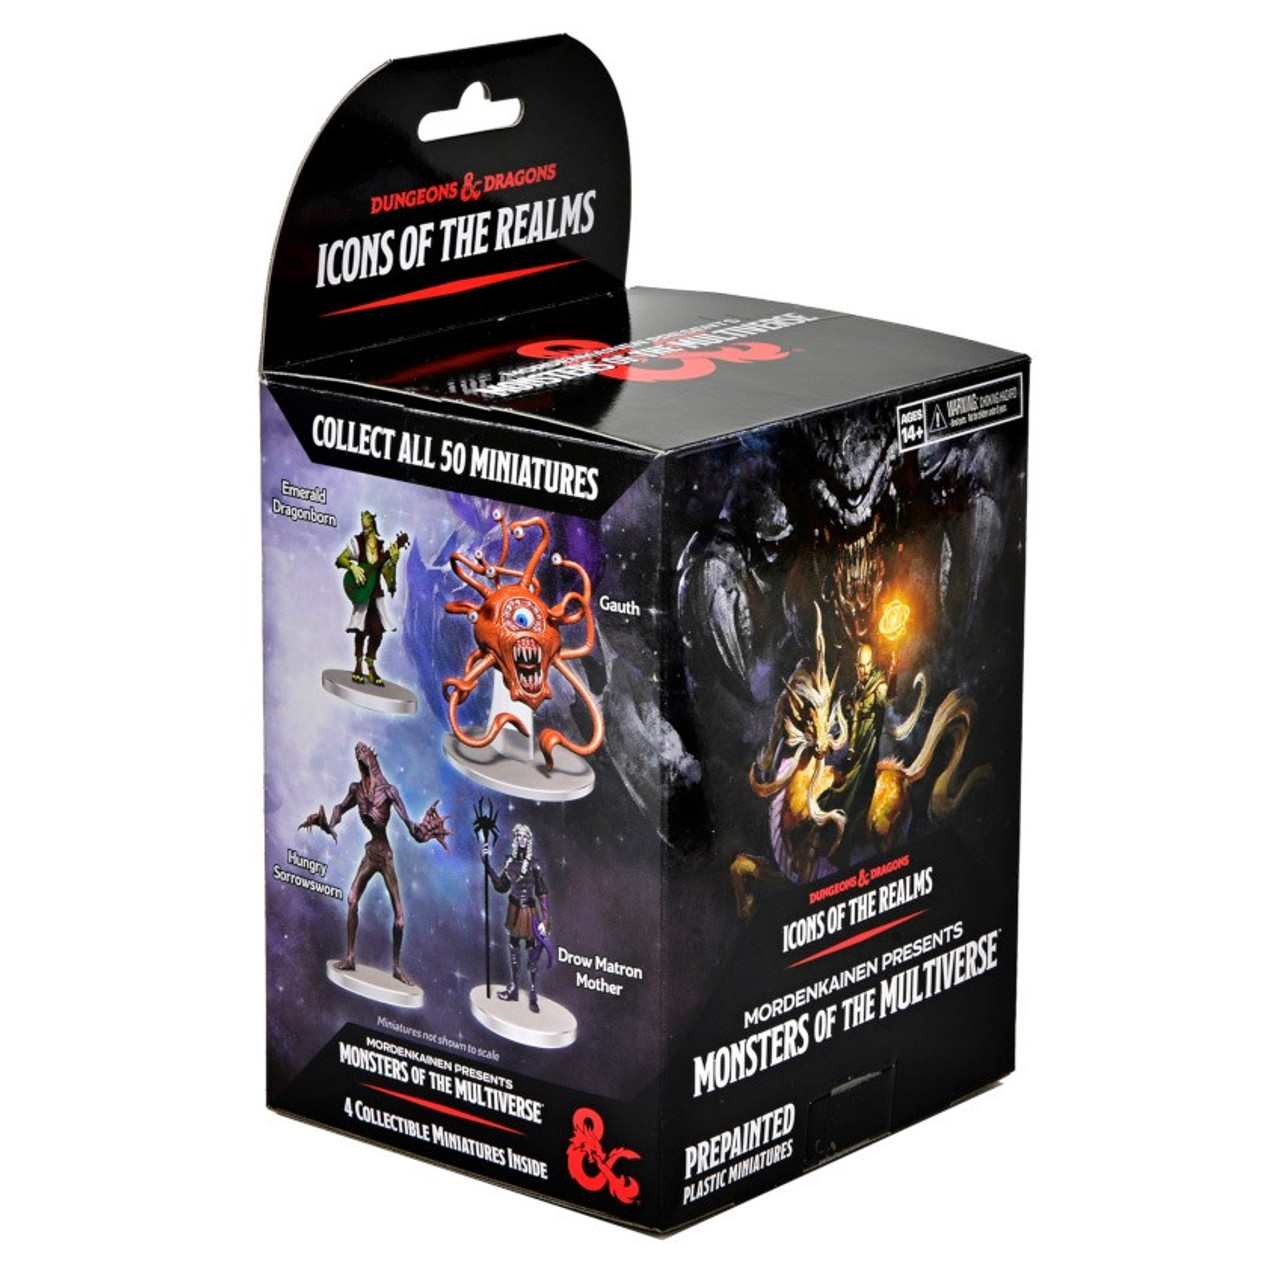 Dungeons & Dragons: Icons of the Realms Set 23 Mordenkainen Presents Monsters of the Multiverse Booster Brick